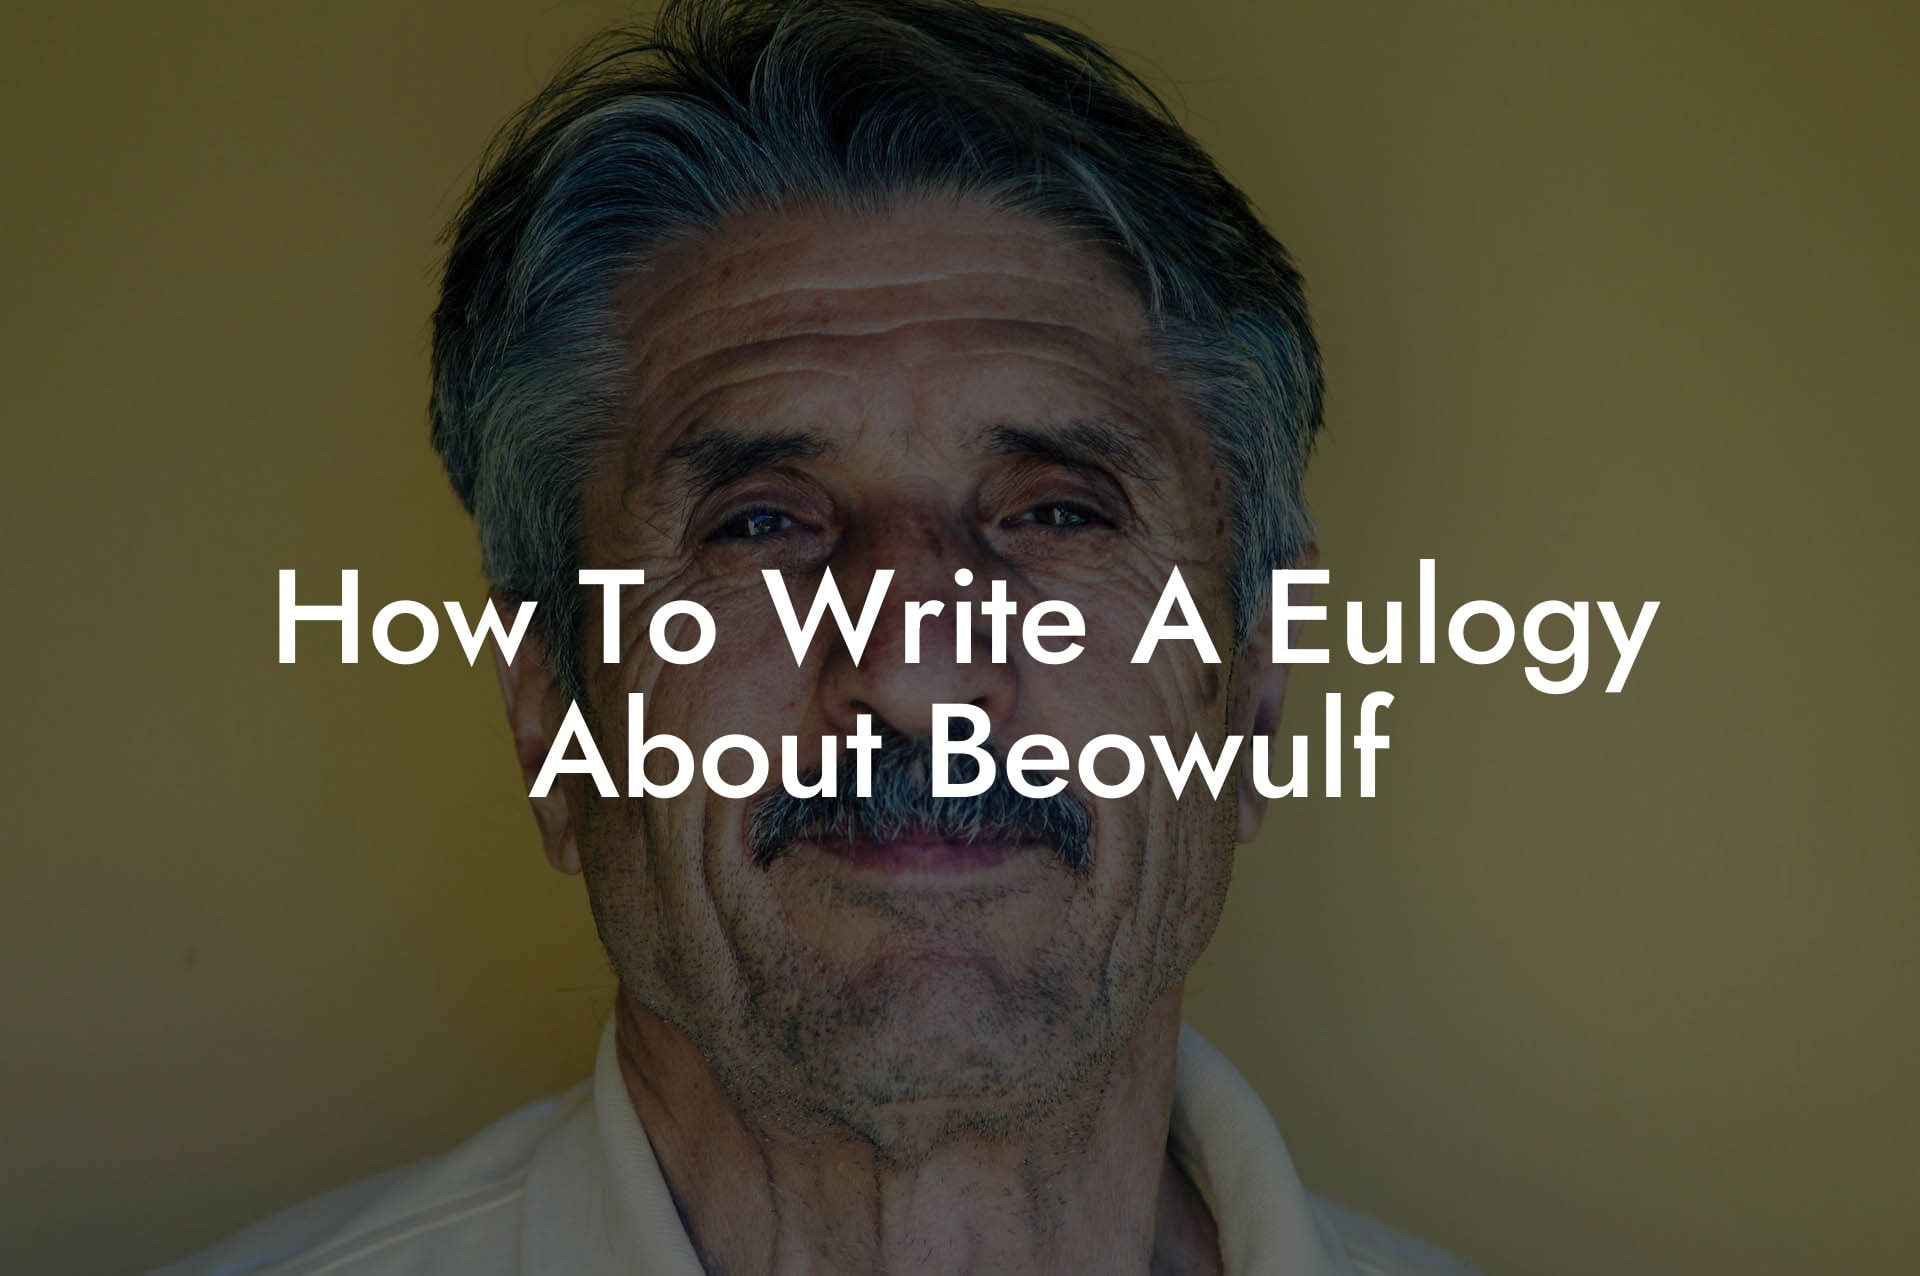 How To Write A Eulogy About Beowulf